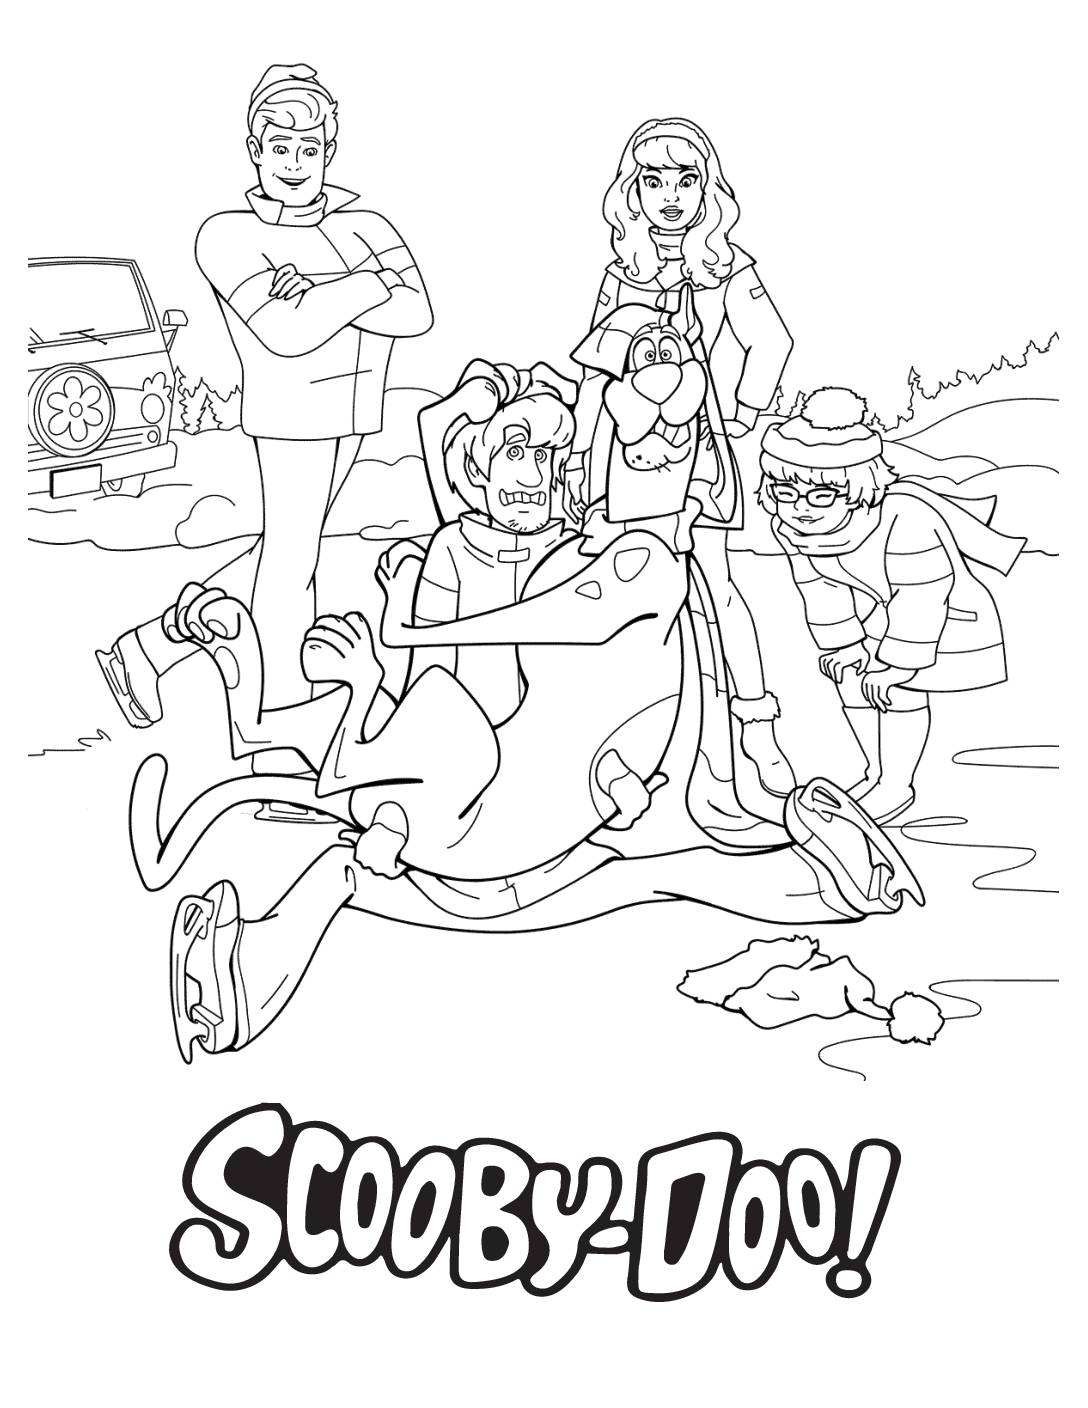 Coloring Page  Scooby Doo  pdf